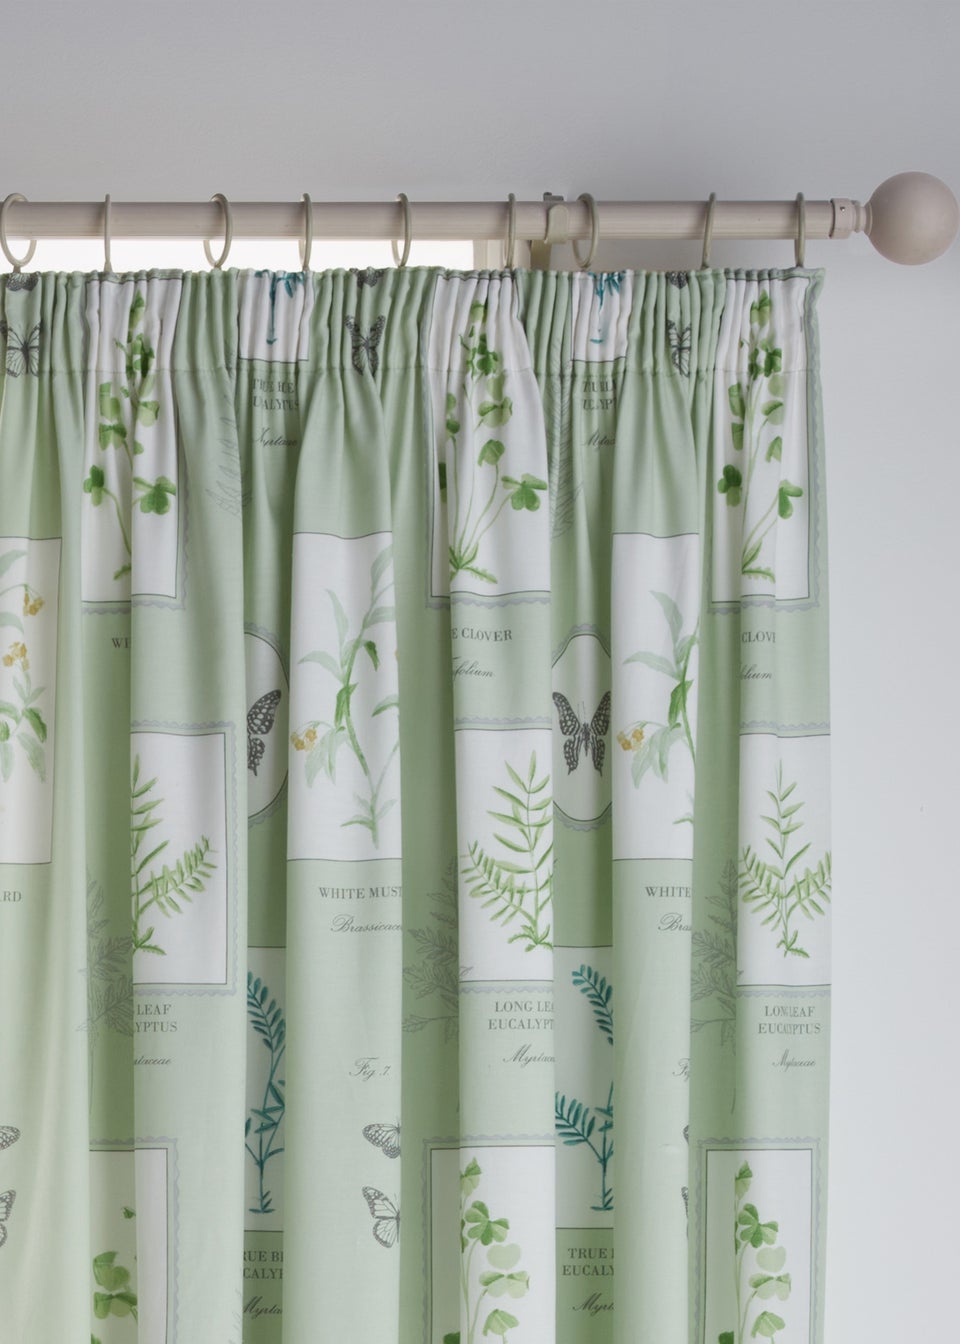 Dreams & Drapes Design Floral Garden Green Pencil Pleat Curtains With Tie-Backs